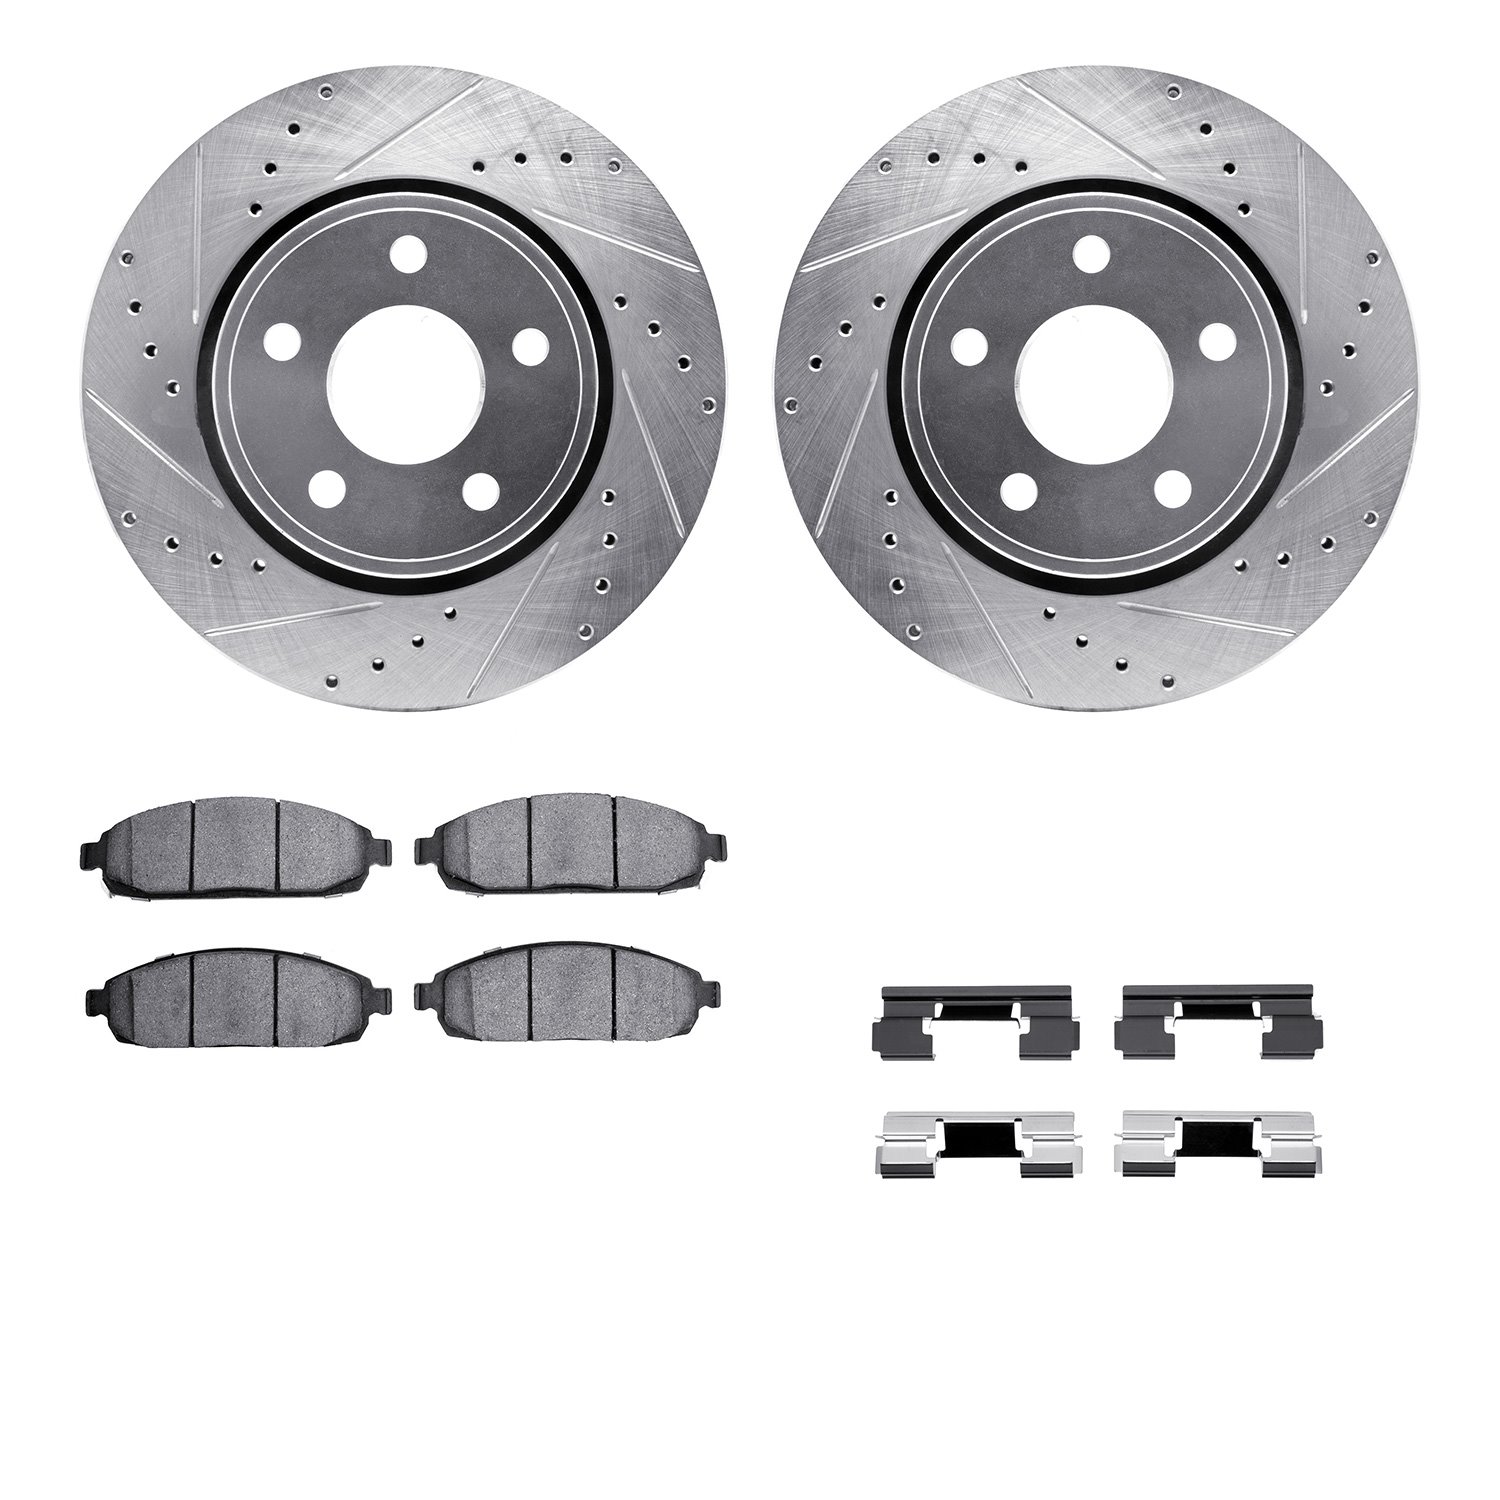 7412-42001 Drilled/Slotted Brake Rotors with Ultimate-Duty Brake Pads Kit & Hardware [Silver], 2005-2010 Mopar, Position: Front